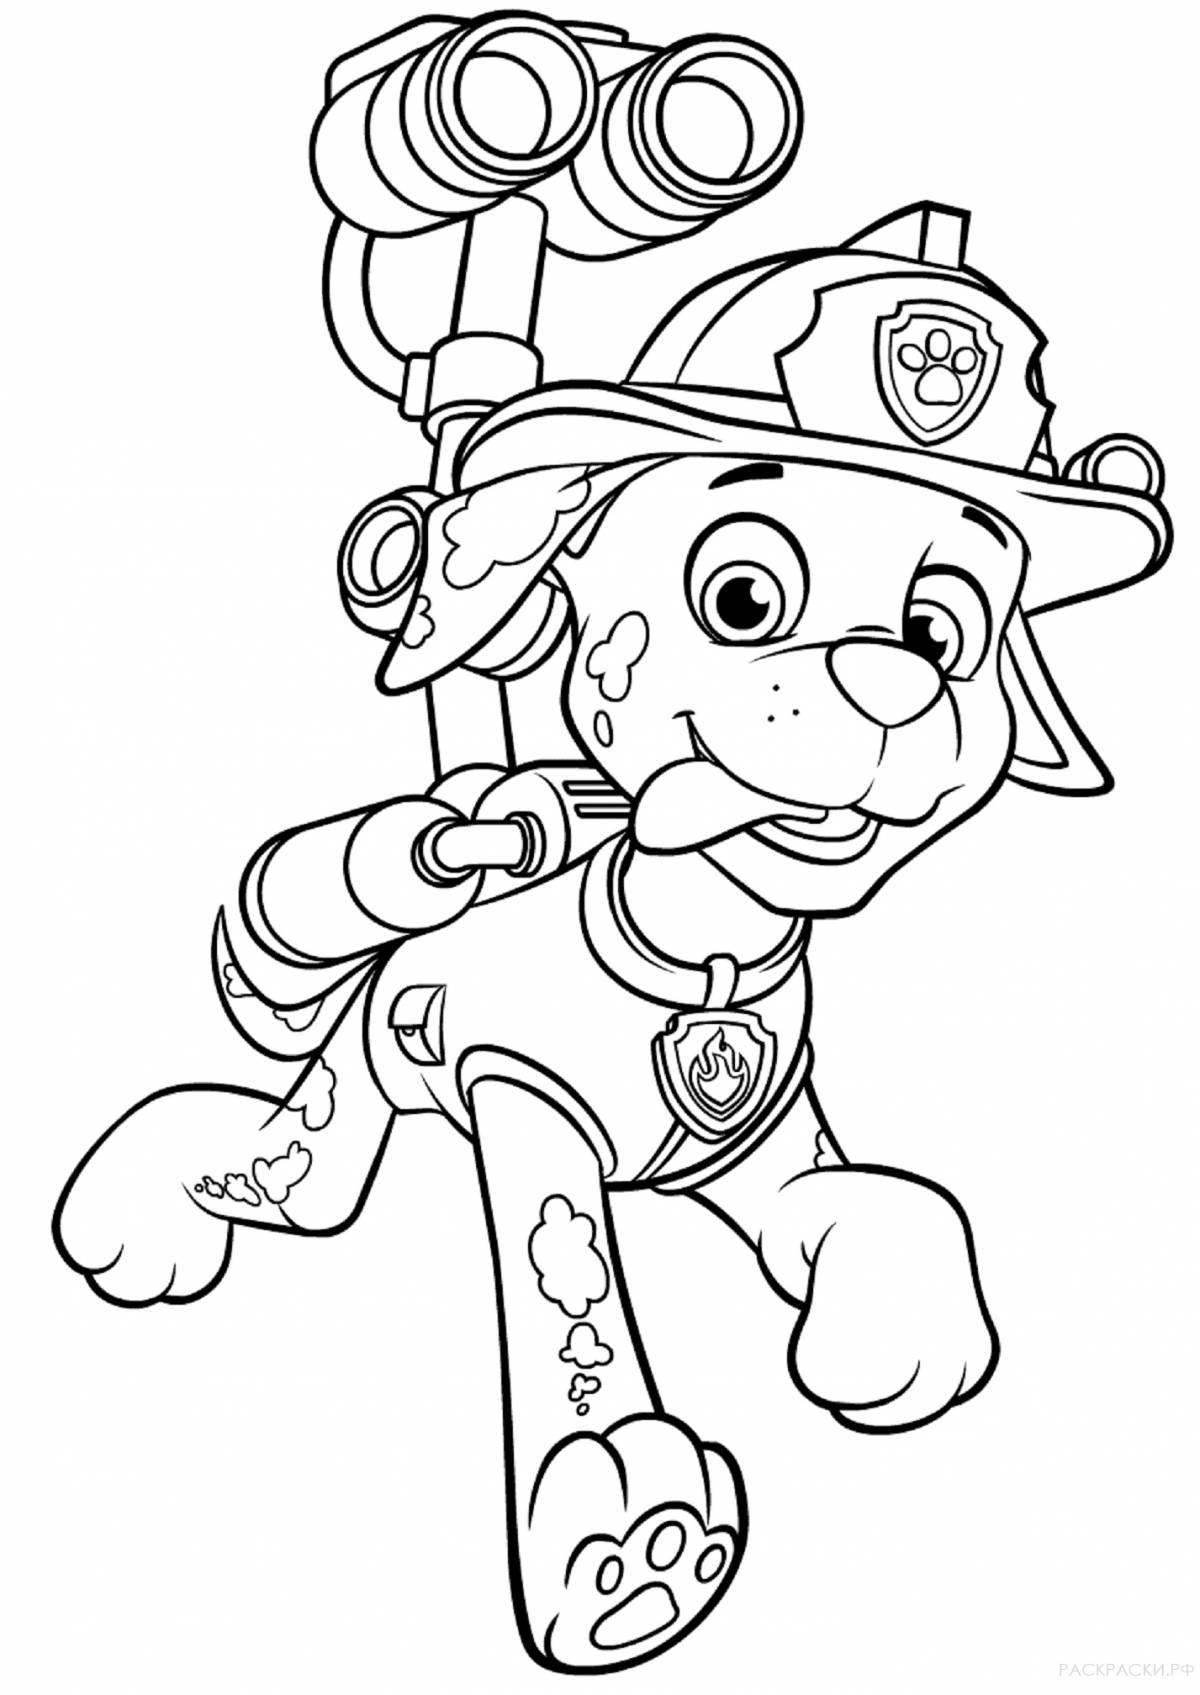 Colorful water paw patrol coloring page